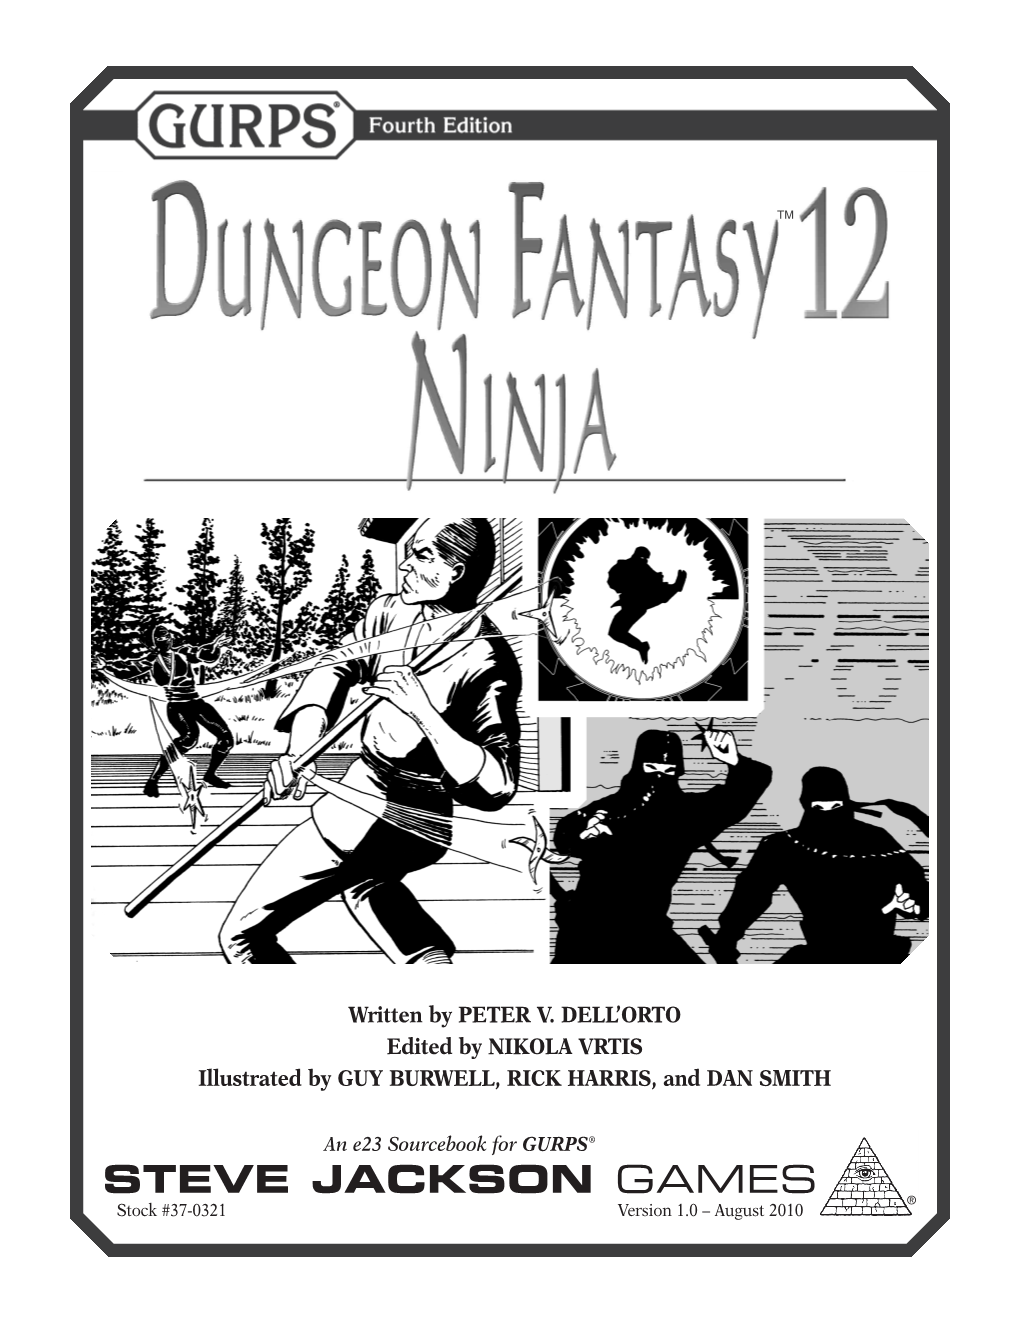 GURPS Dungeon Fantasy 12: Ninja Can Be Found a T